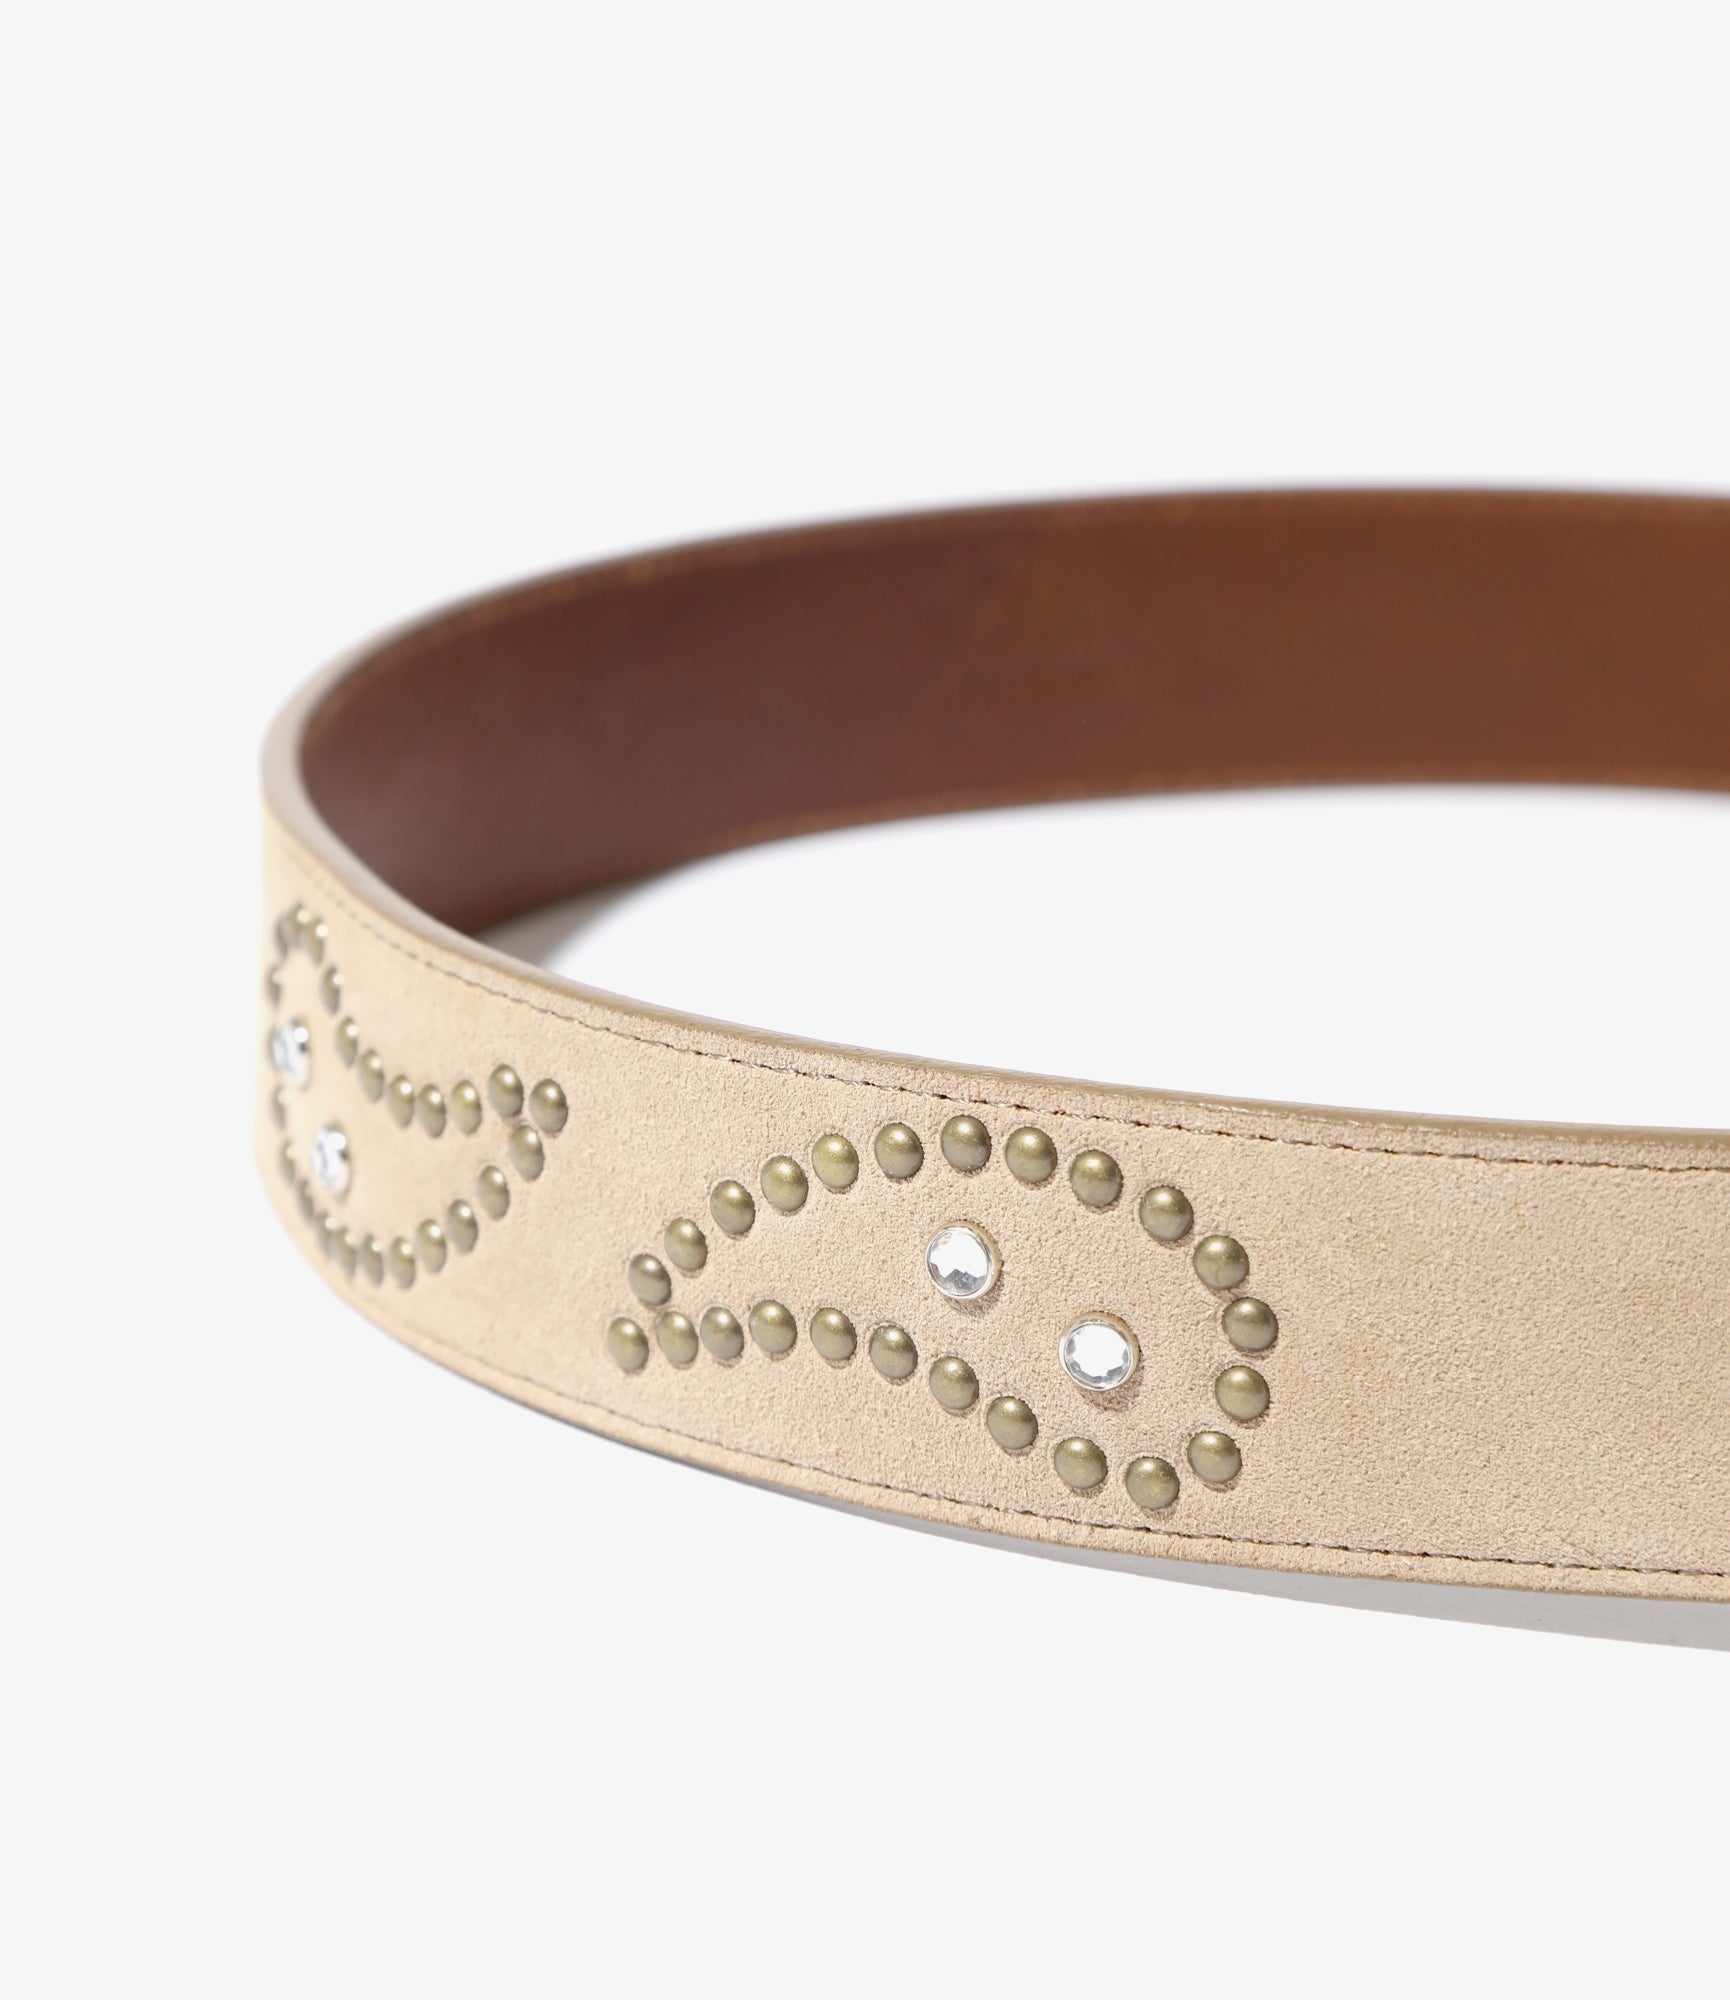 Paisley Studs Belt - Taupe - Suede Leather